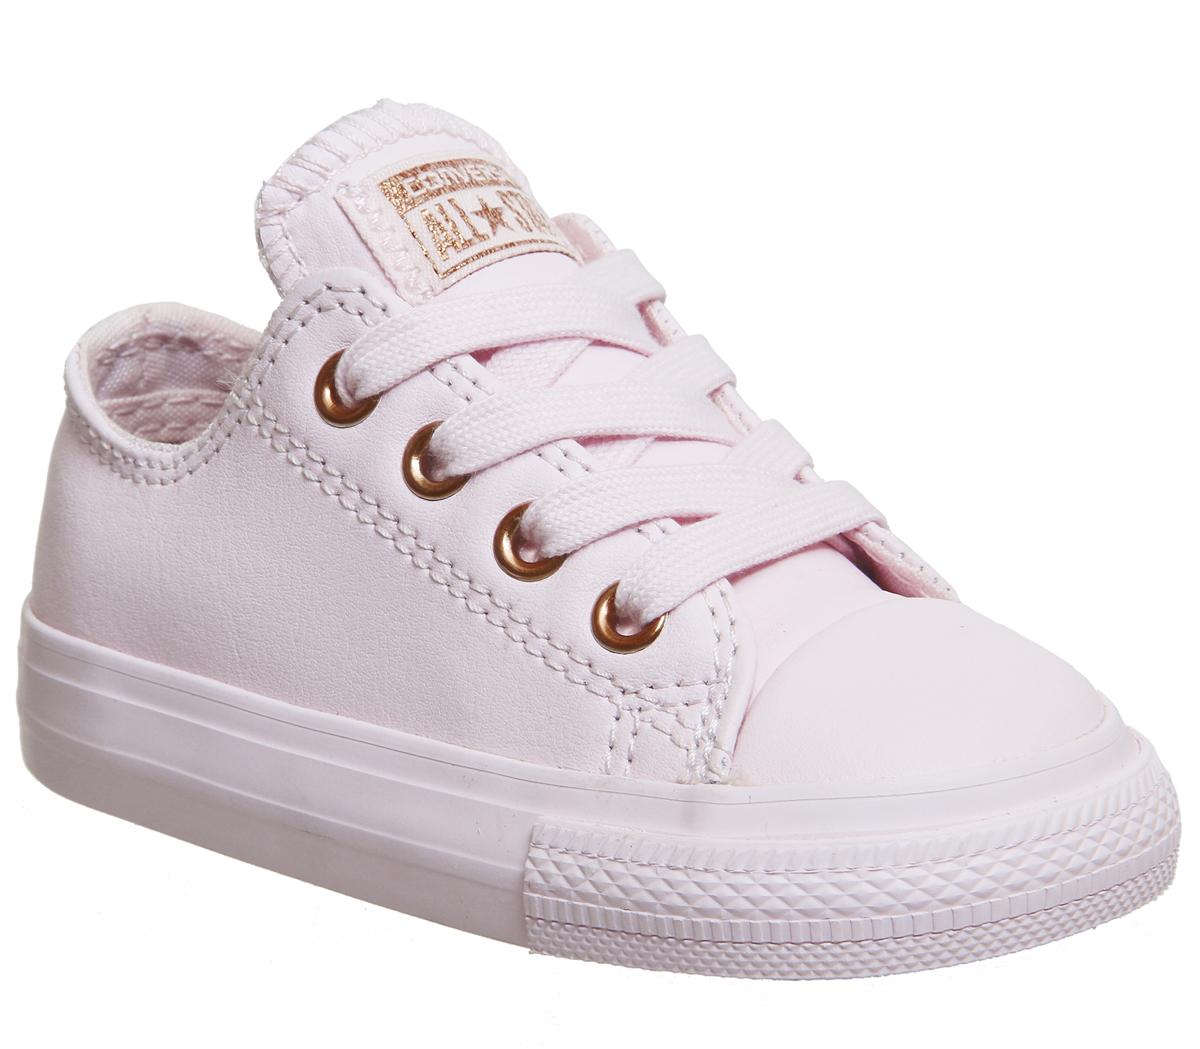 Converse All Star Ox Leather Infant 